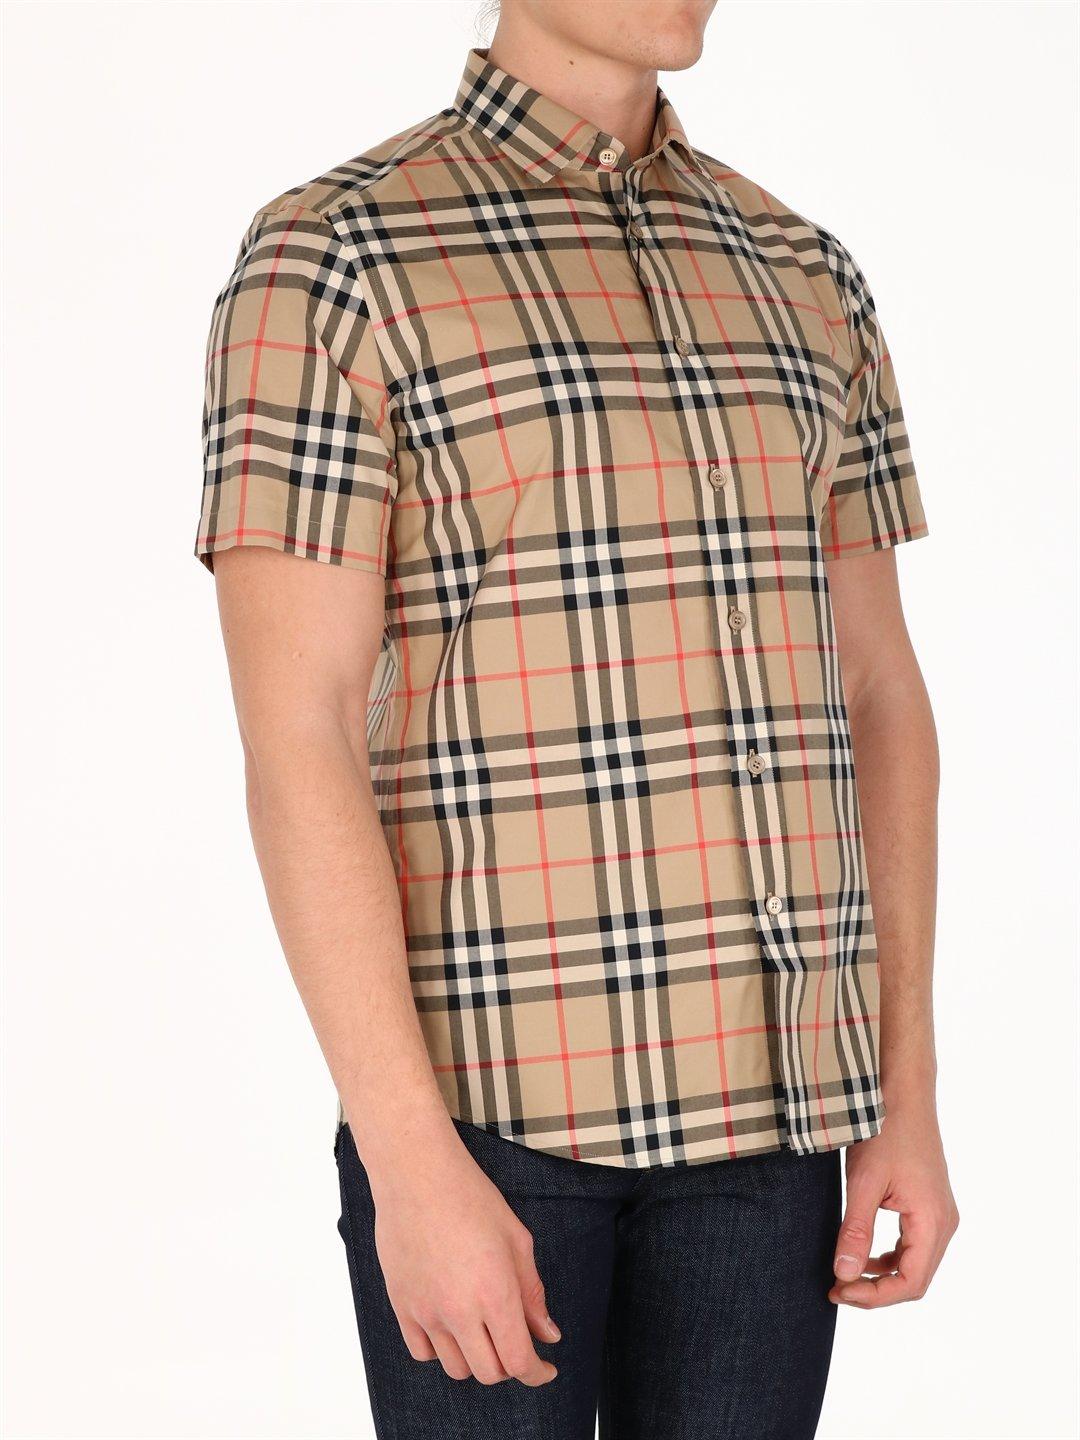 Burberry Vintage Check Shirt in Natural for Men - Lyst